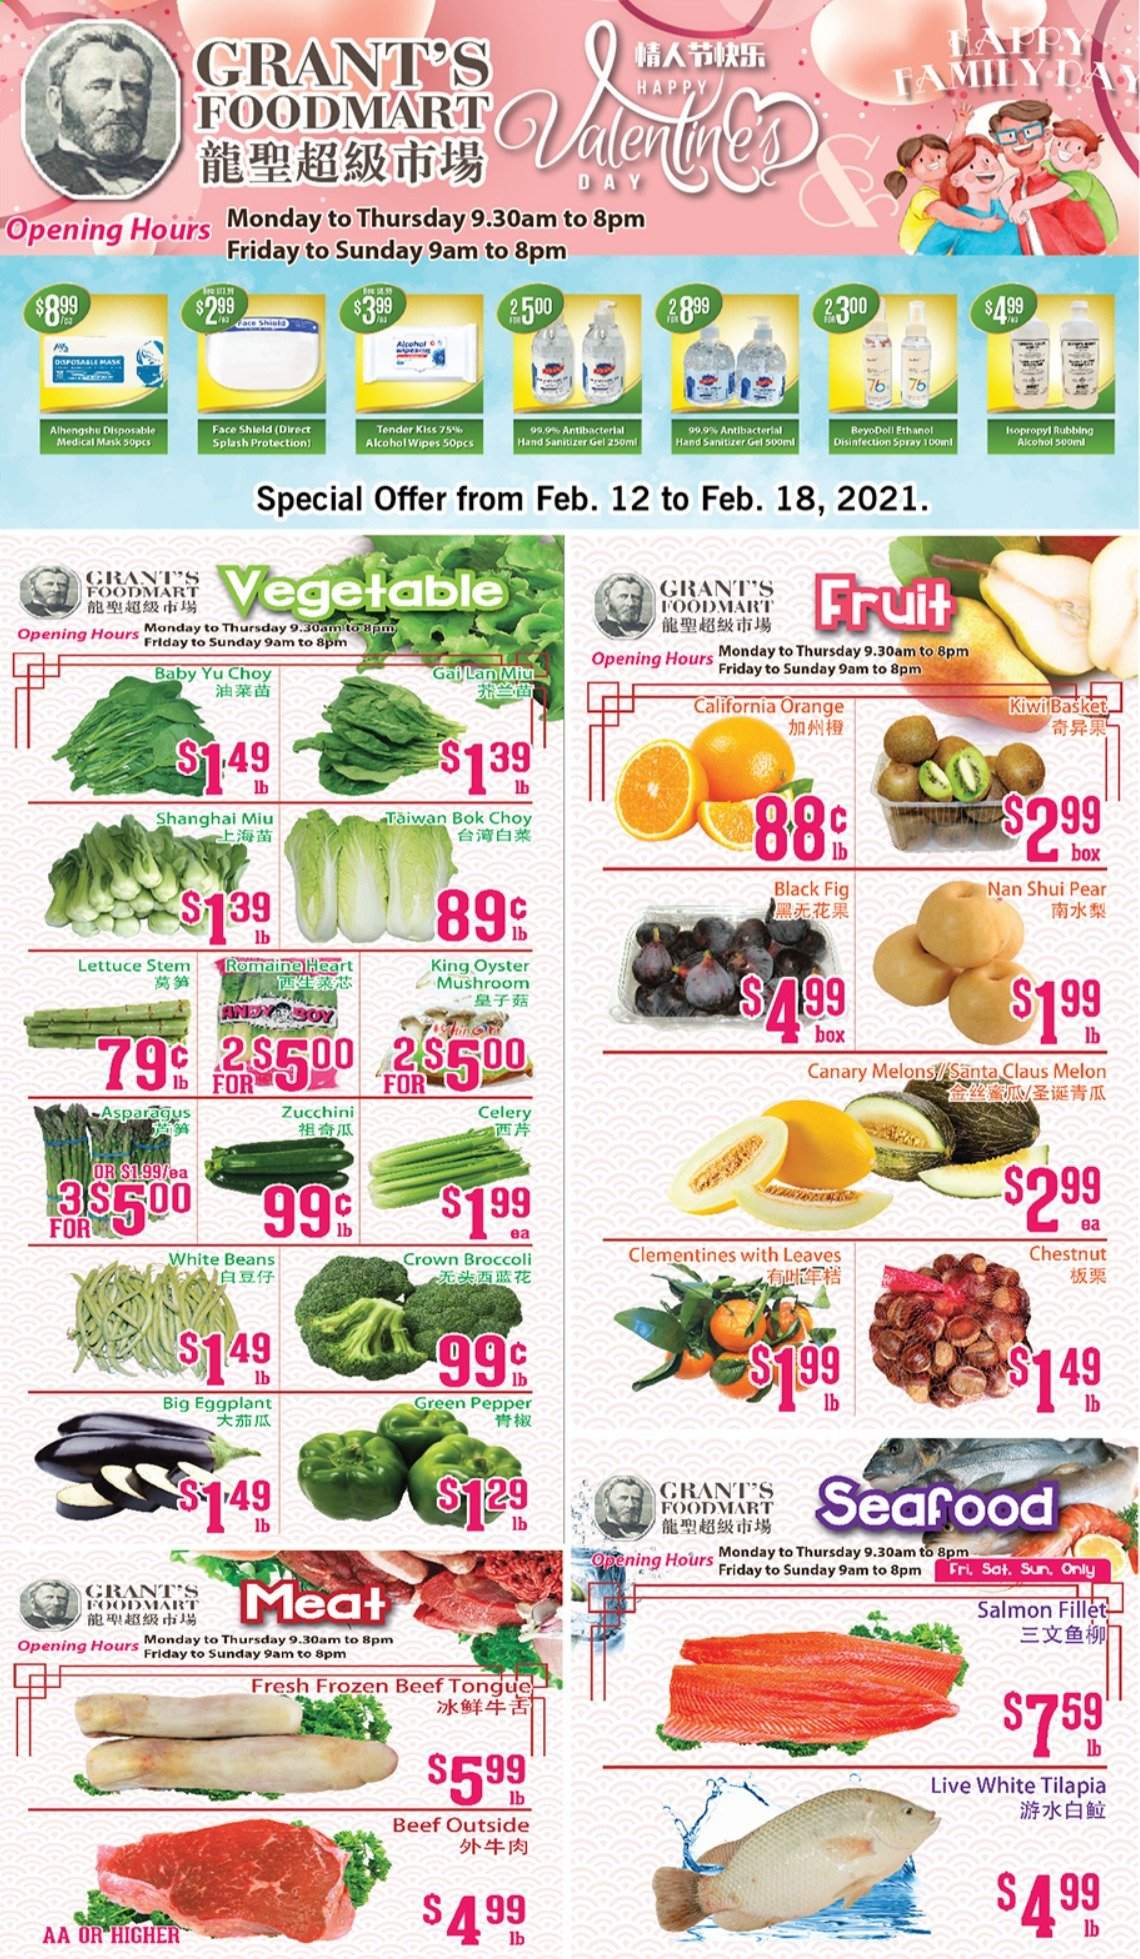 thumbnail - Grant's Foodmart Flyer - February 12, 2021 - February 18, 2021 - Sales products - oyster mushrooms, mushrooms, asparagus, beans, bok choy, broccoli, celery, zucchini, lettuce, eggplant, green pepper, clementines, pears, melons, salmon, salmon fillet, tilapia, oysters, Santa, Grant's, hand sanitizer, kiwi. Page 1.